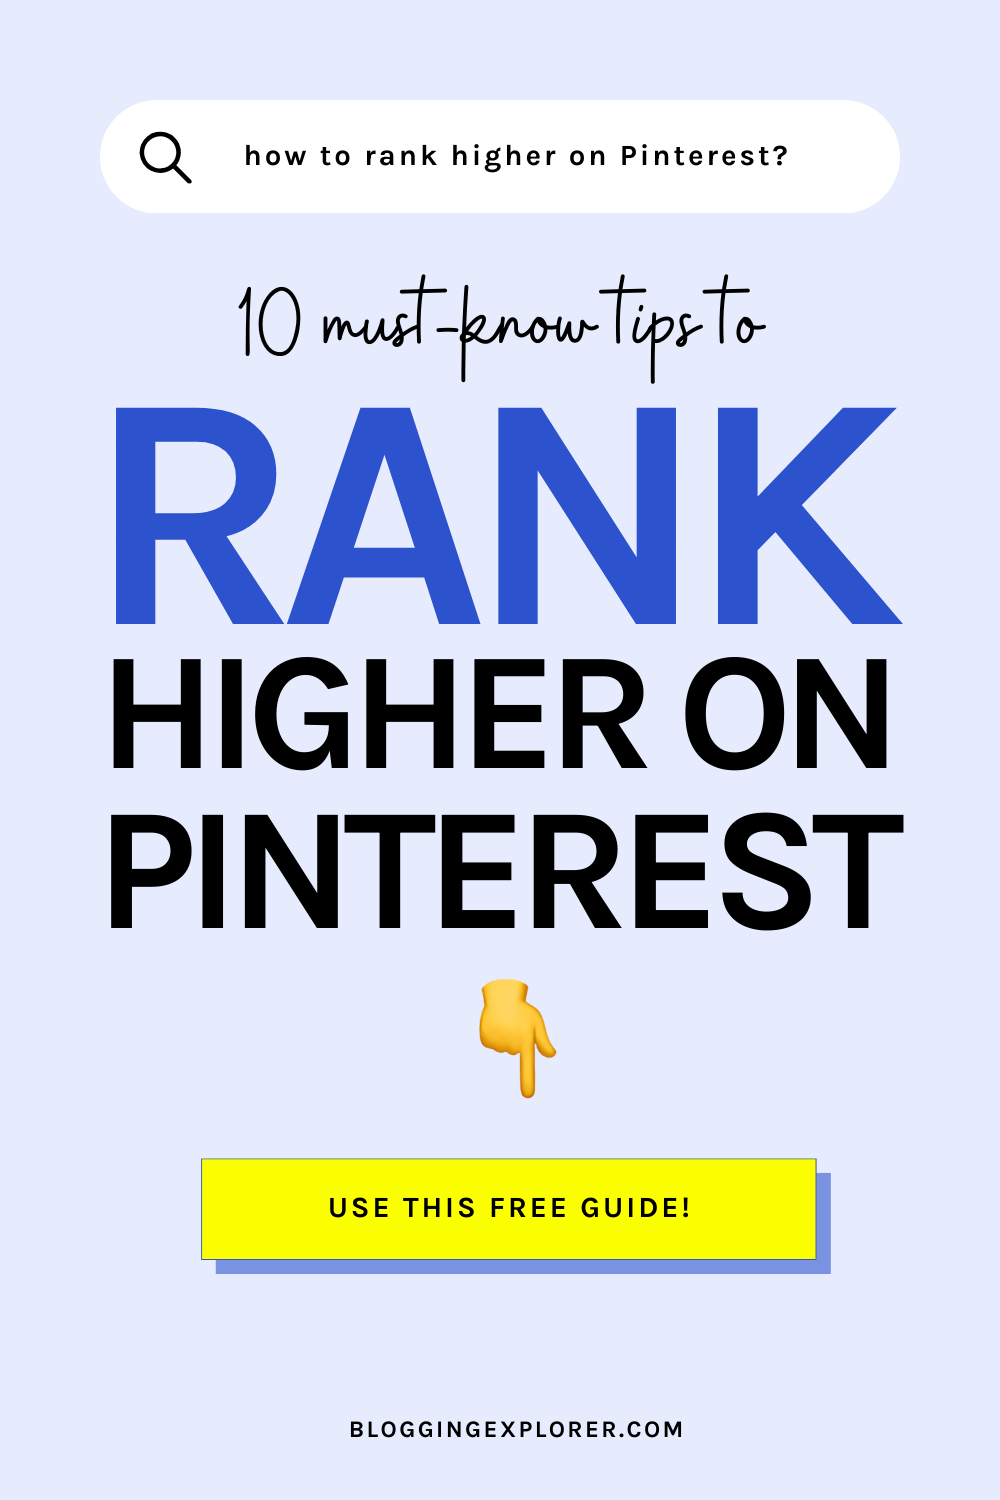 How to rank higher on Pinterest – Free Pinterest marketing guide